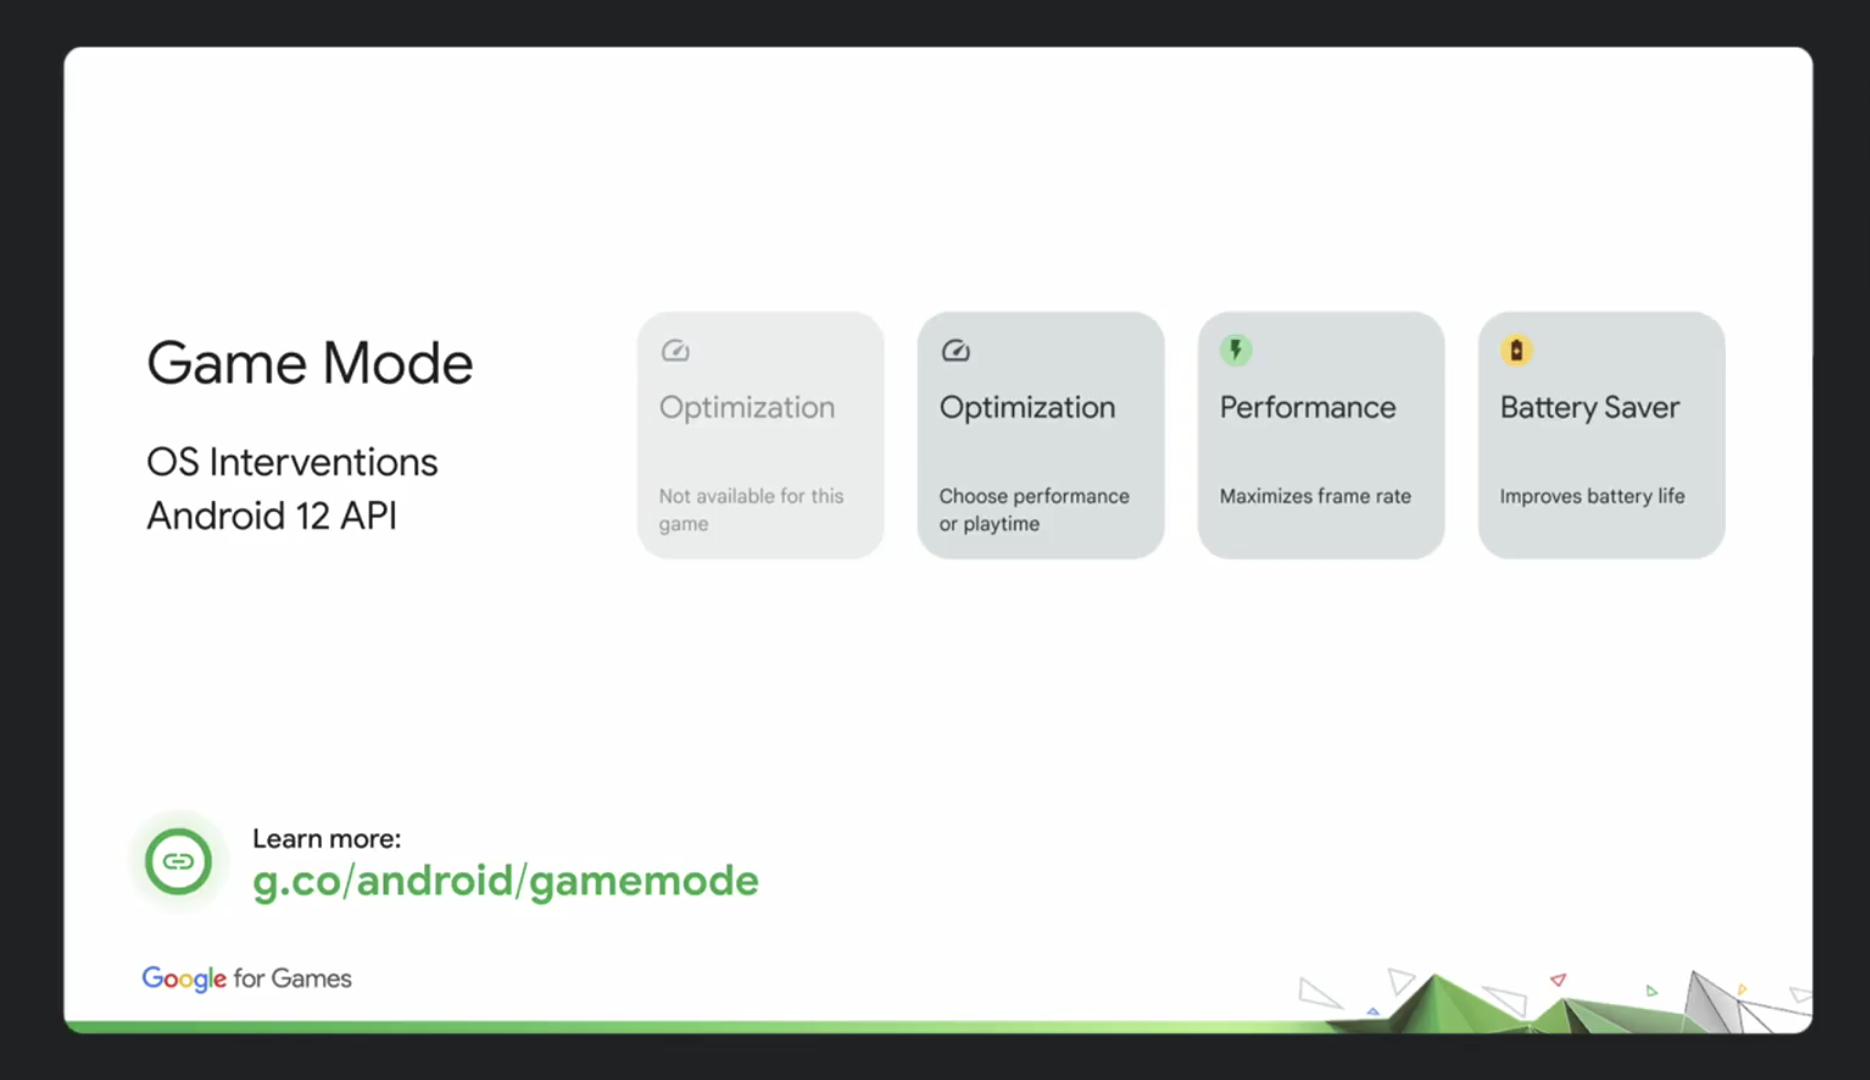 Google Play Games 'Play as you download', new game dashboard, more announced